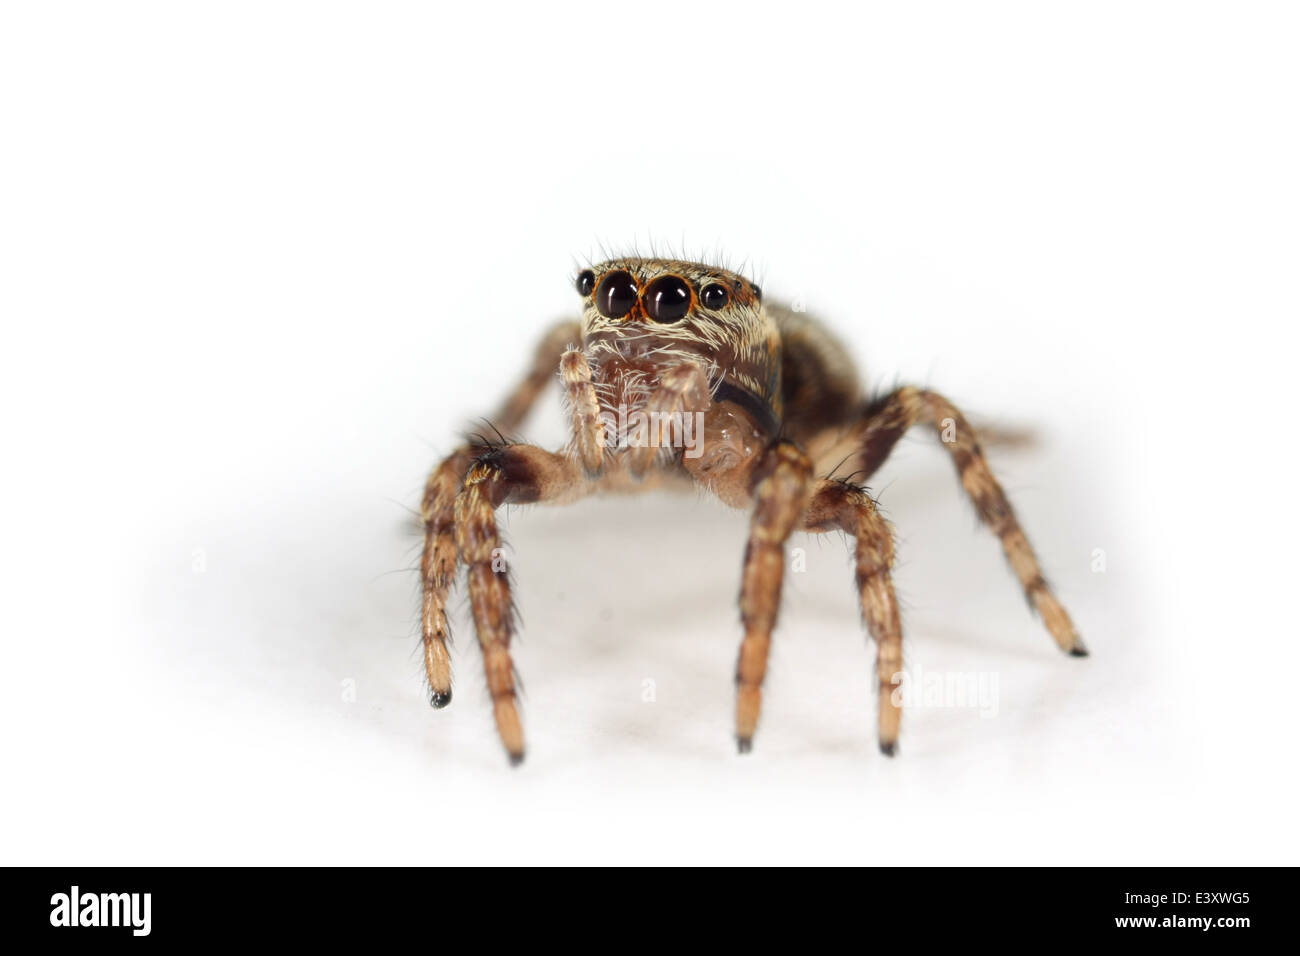 Female Evarcha falcata spider, part of the family Salticidae -  Jumping spiders. Stock Photo